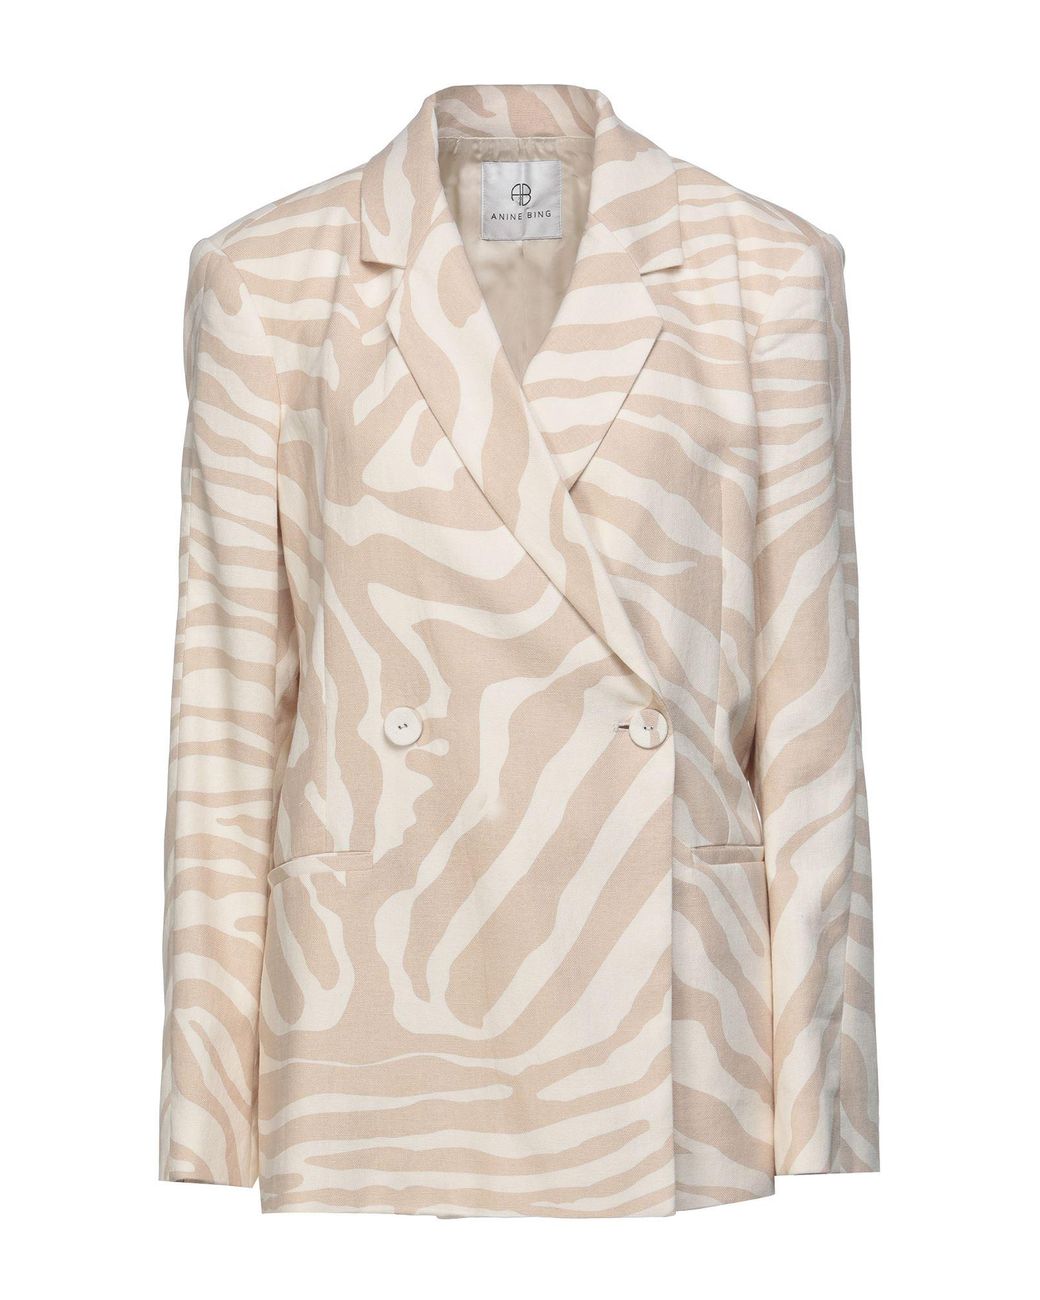 Anine Bing Suit Jacket in Ivory (Natural) - Lyst